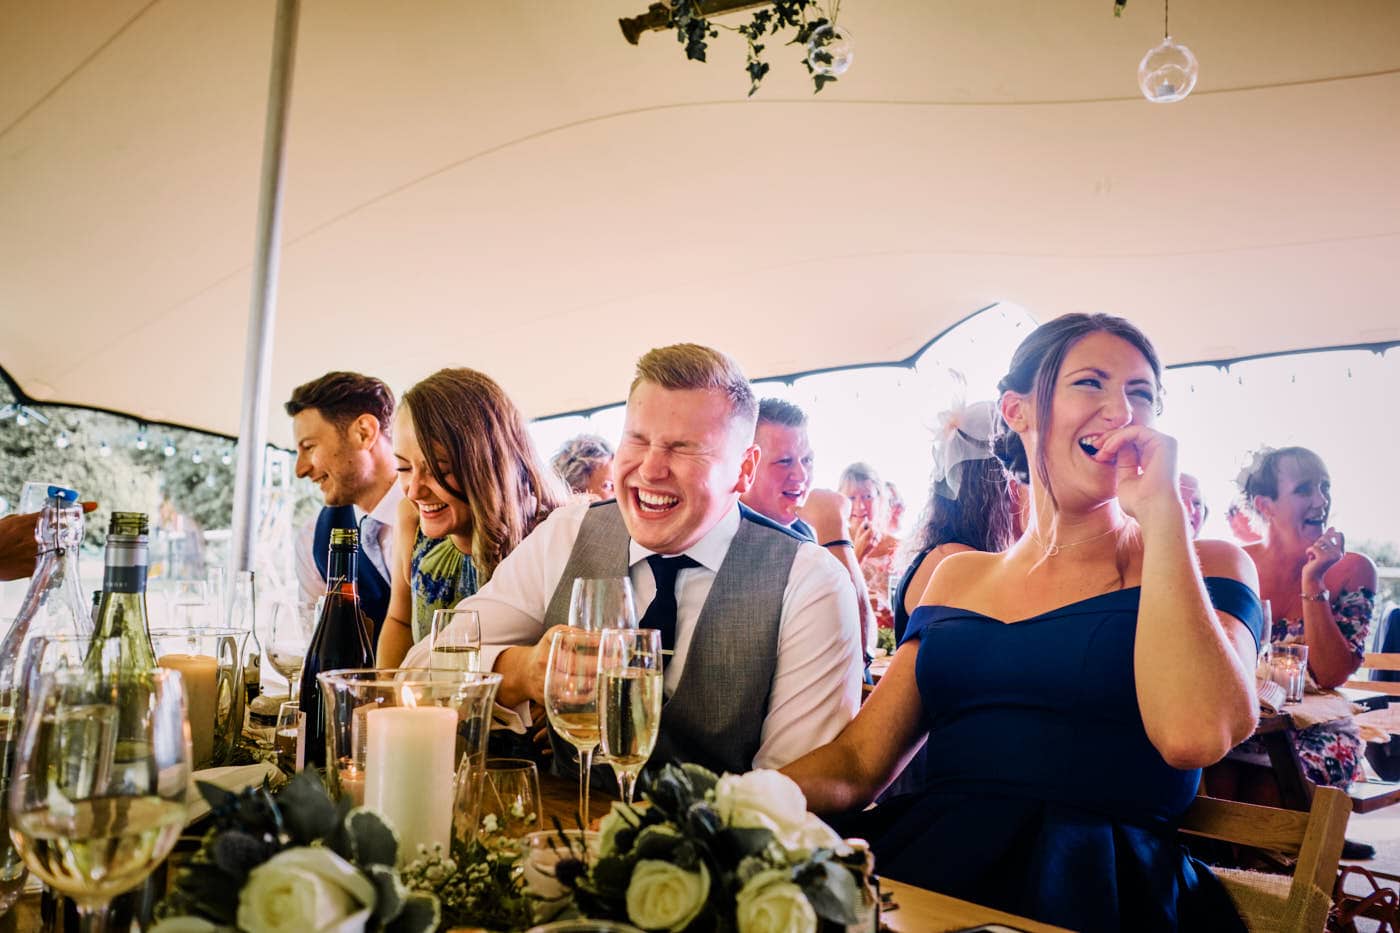 Guests laughing during speeches